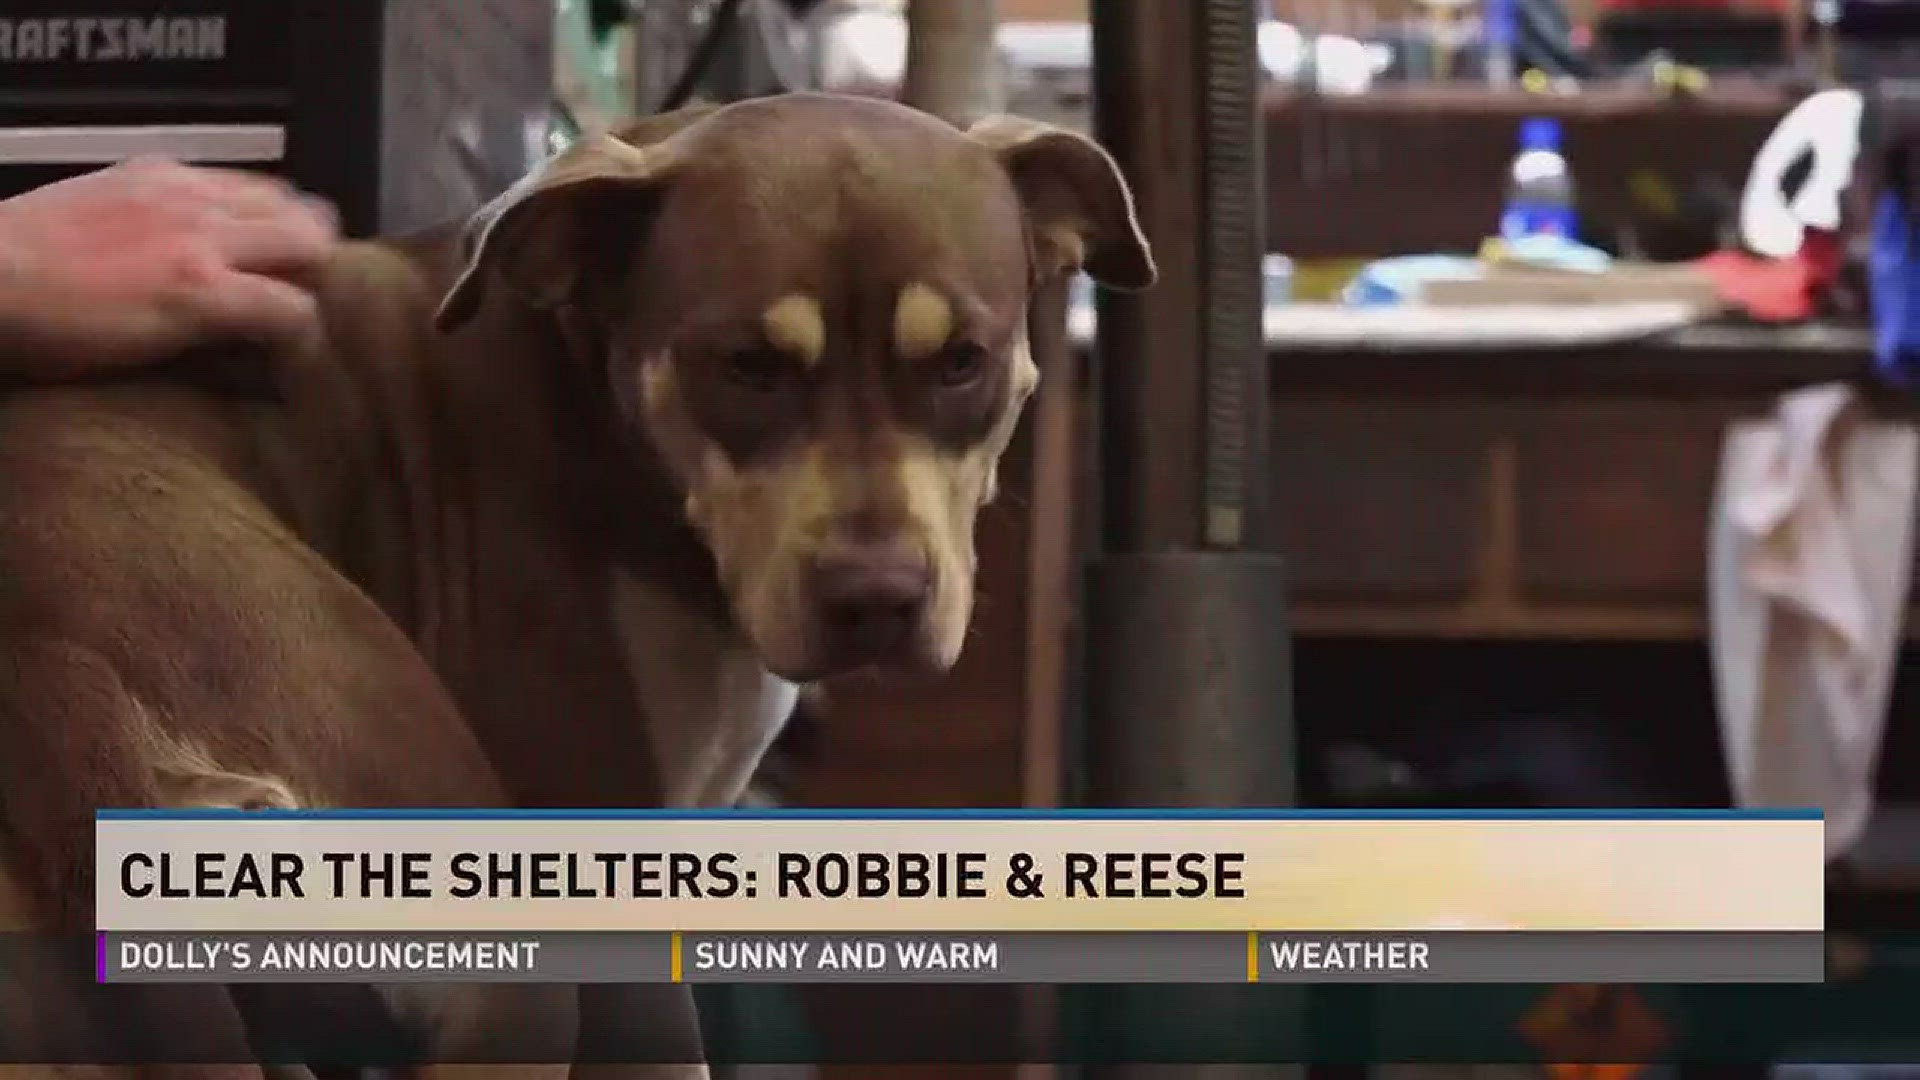 Robbie struggled with intense PTSD before he met Reese. The adopted pup is now his ray of sunshine.